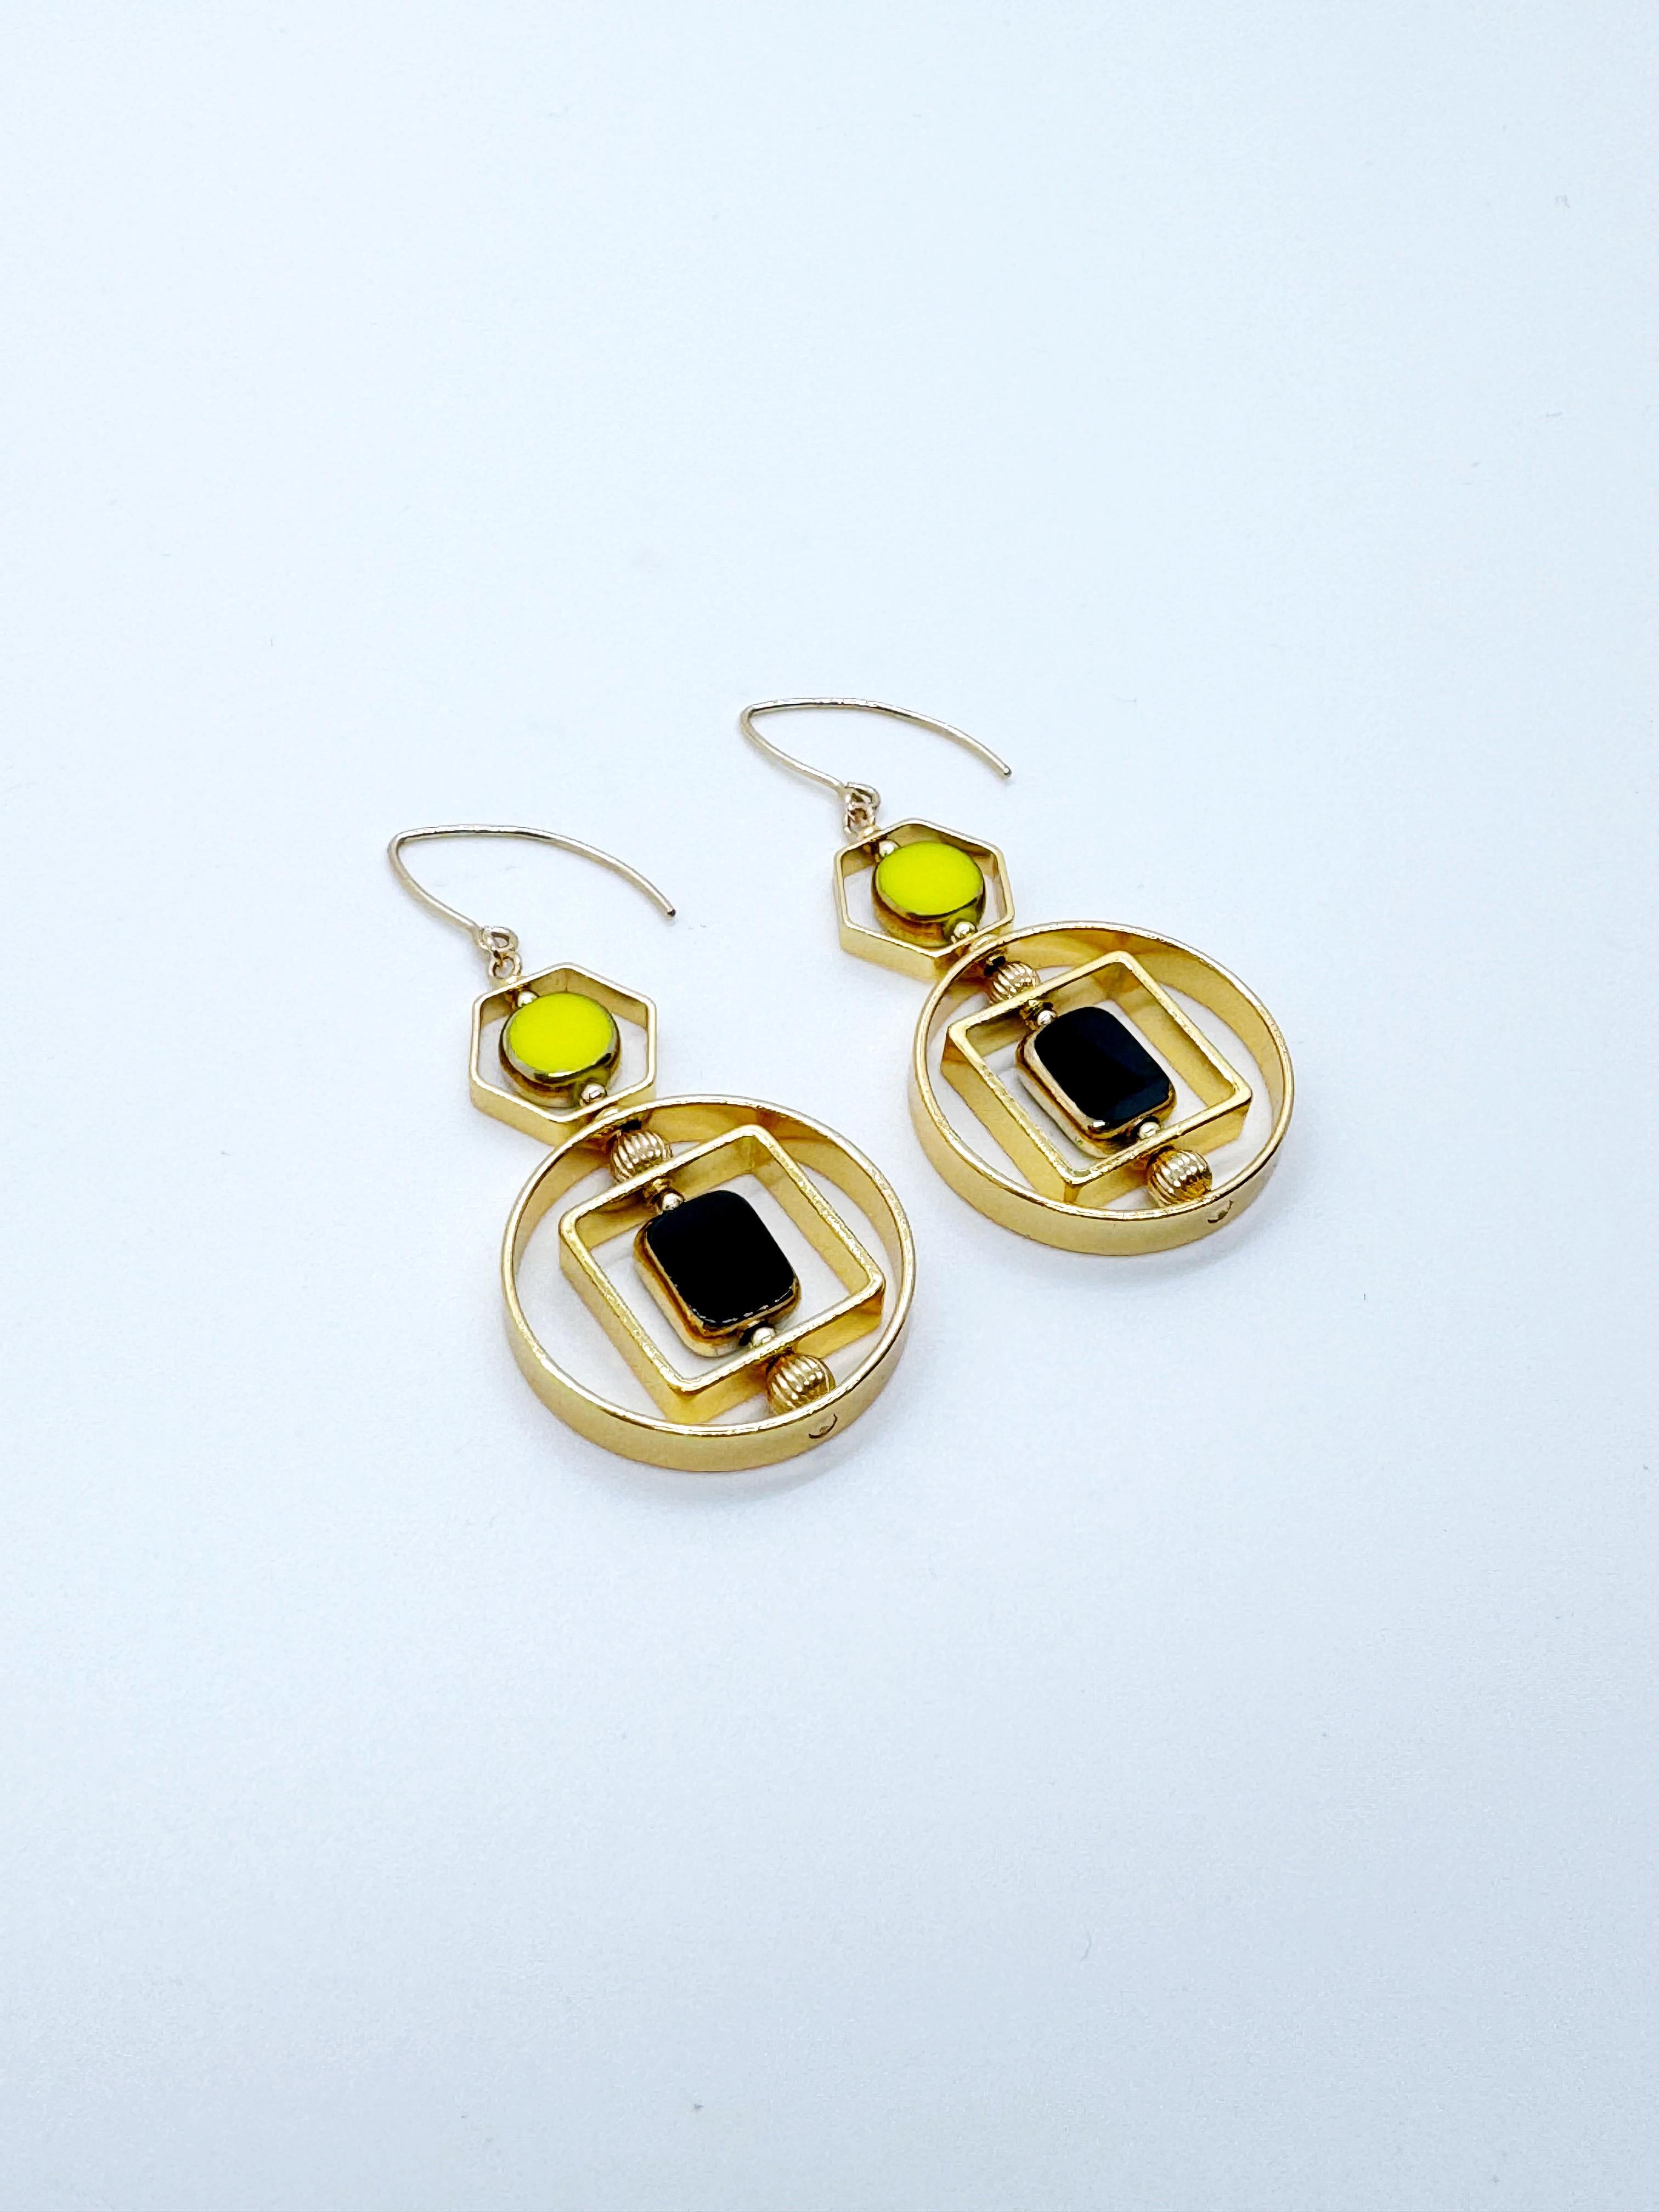 Black And Chartreuse Vintage German Glass Beads, Art Deco 2420E Earrings In New Condition For Sale In Monrovia, CA